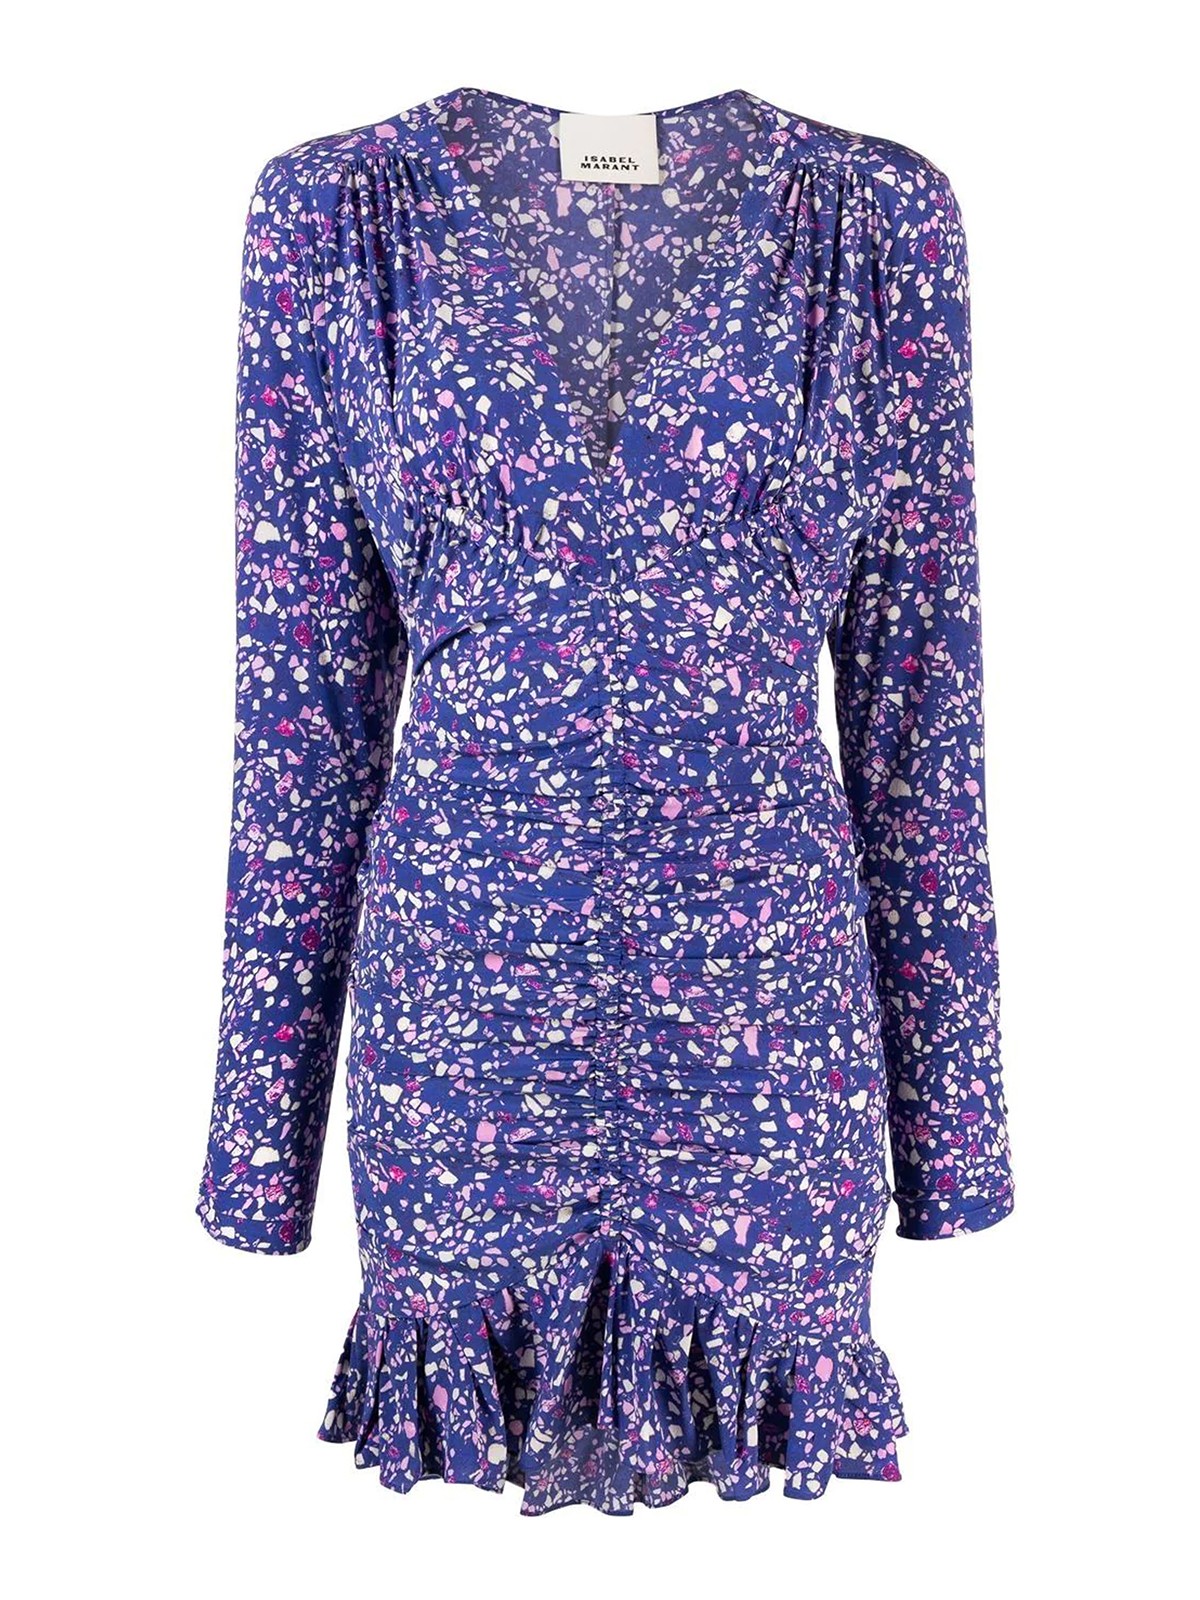 Isabel Marant Ruffled Floral Print Minidress In Multi-colored